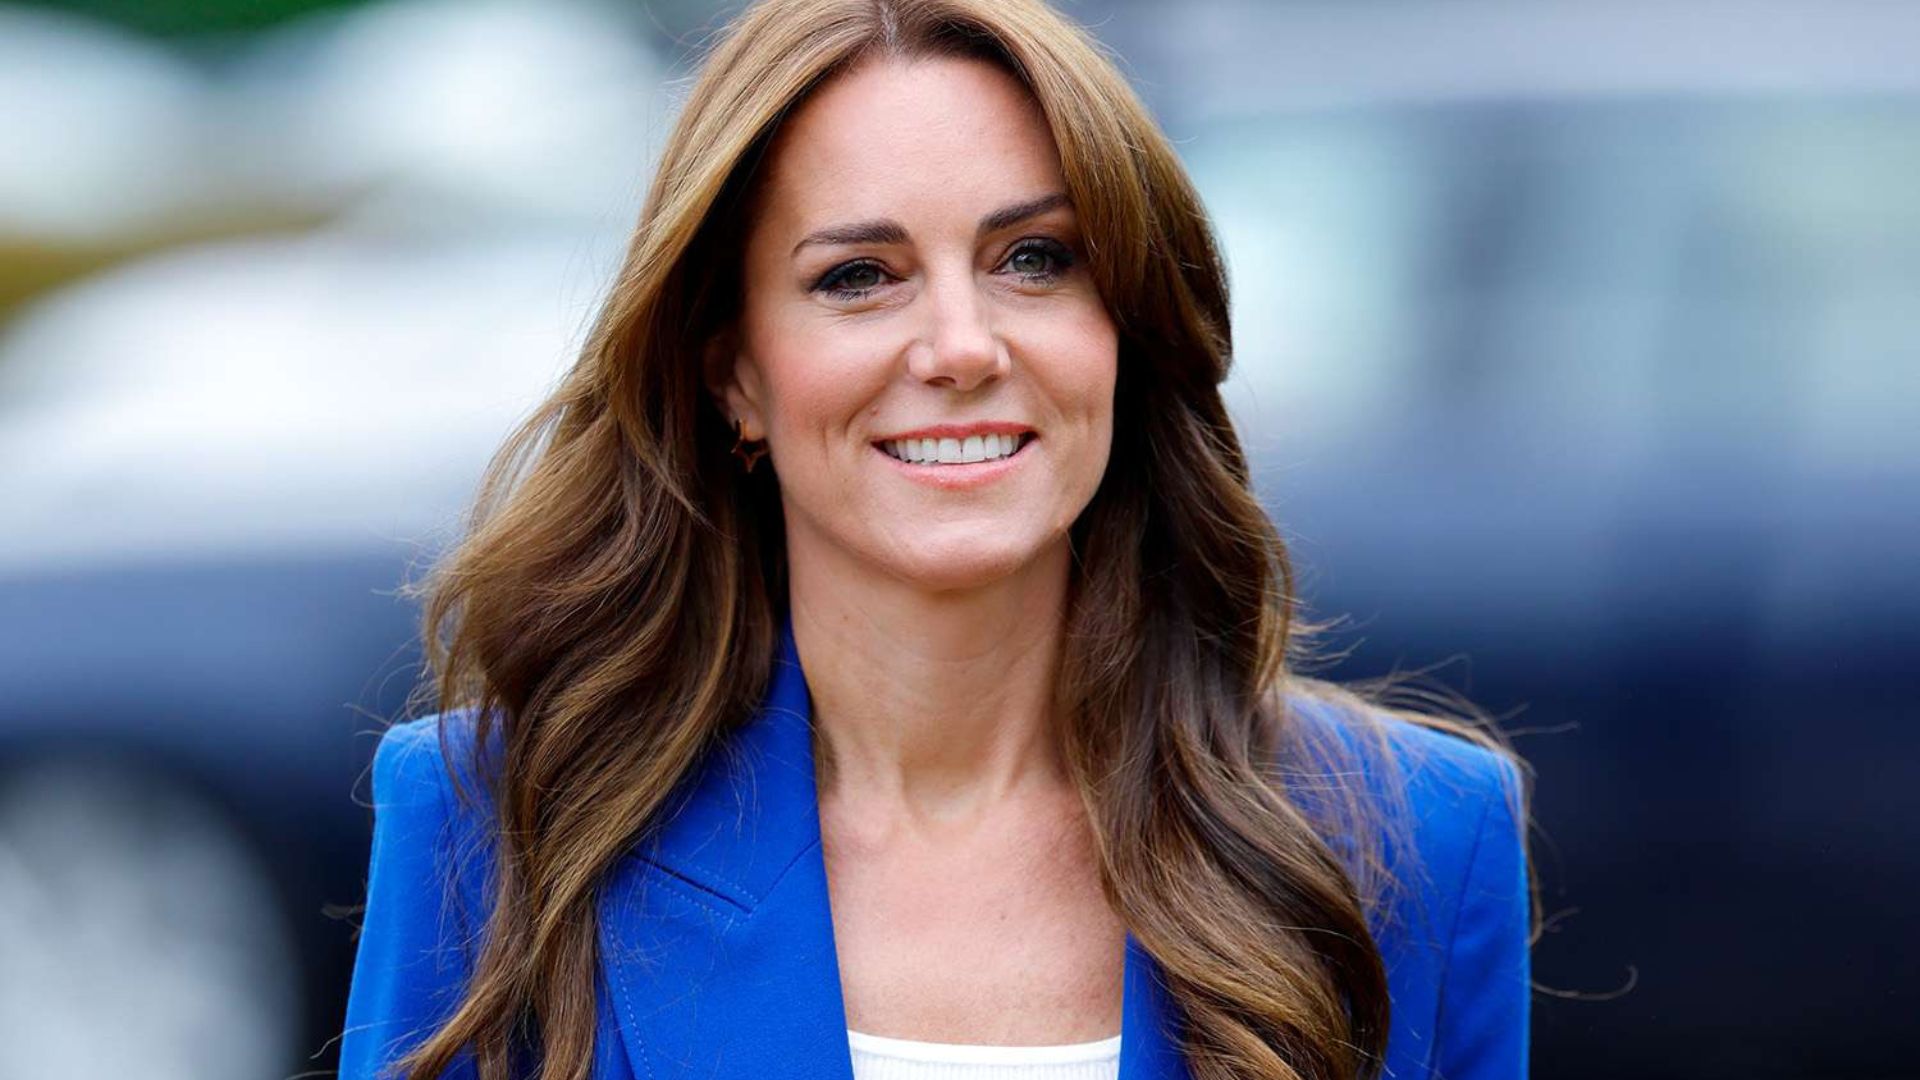 Kate Middleton’s Return to Royal Duties Uncertain, Report Suggests